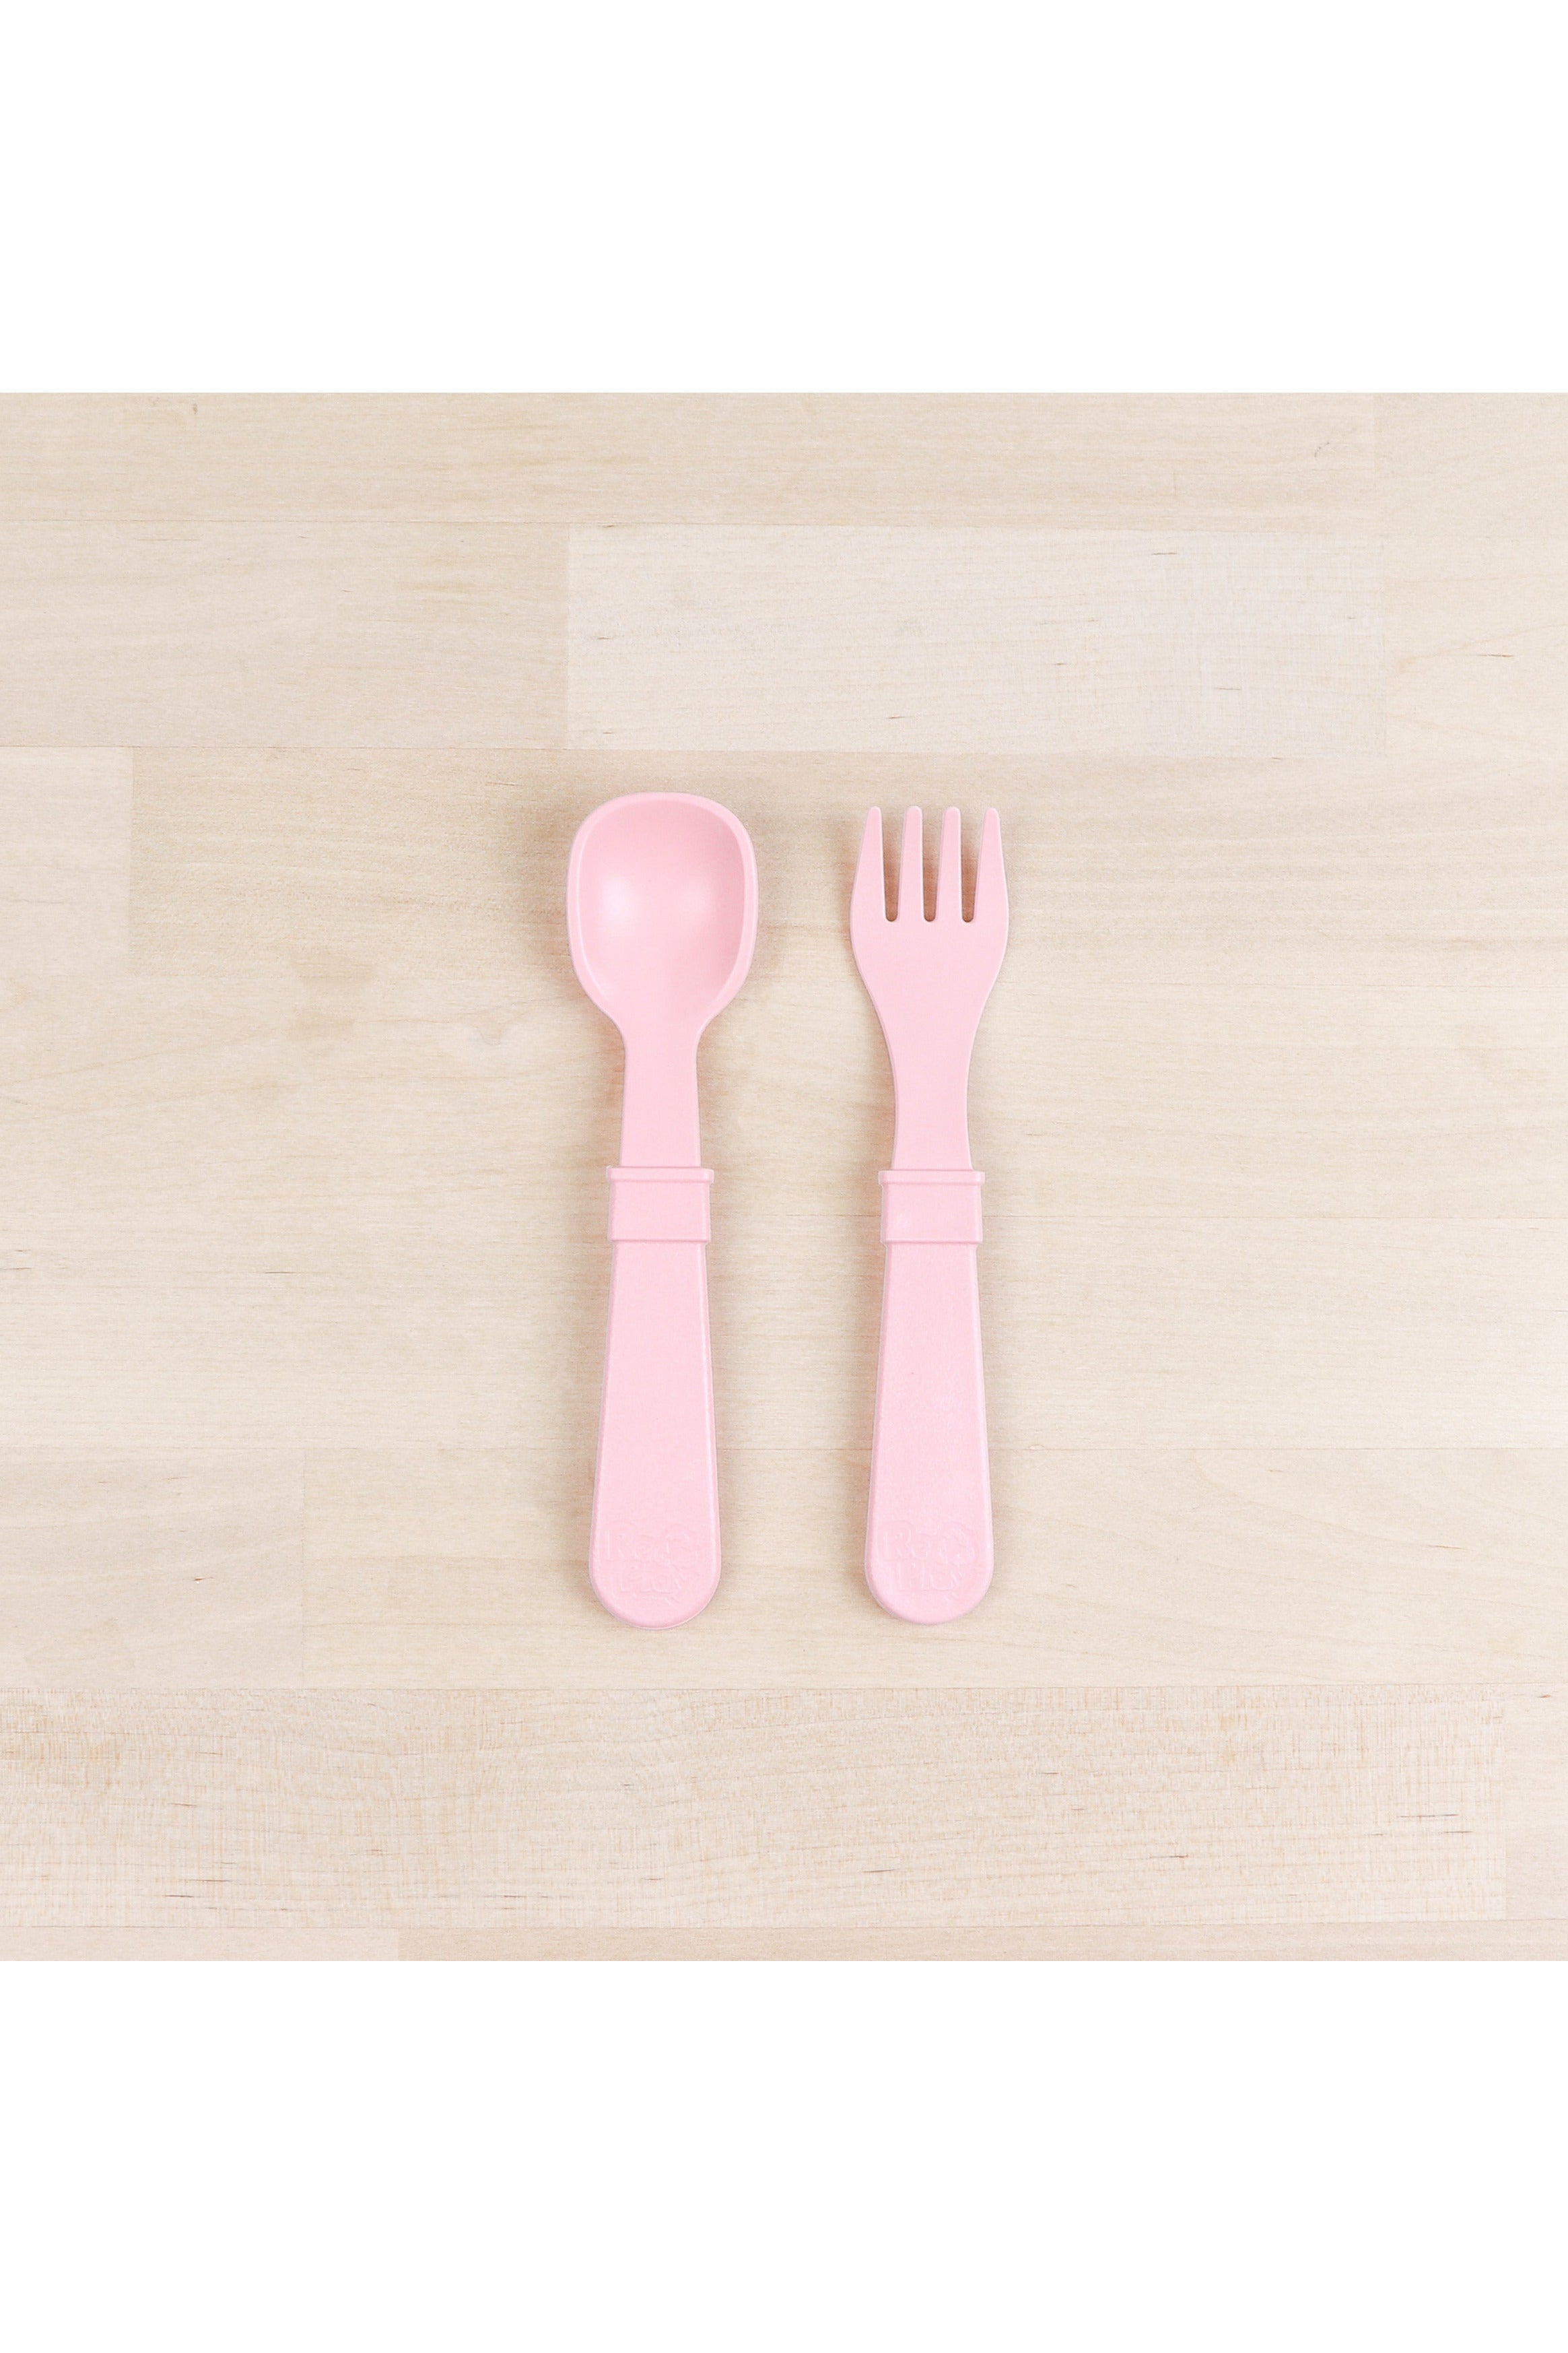 Re-Play Fork and Spoon Set - Ice Pink